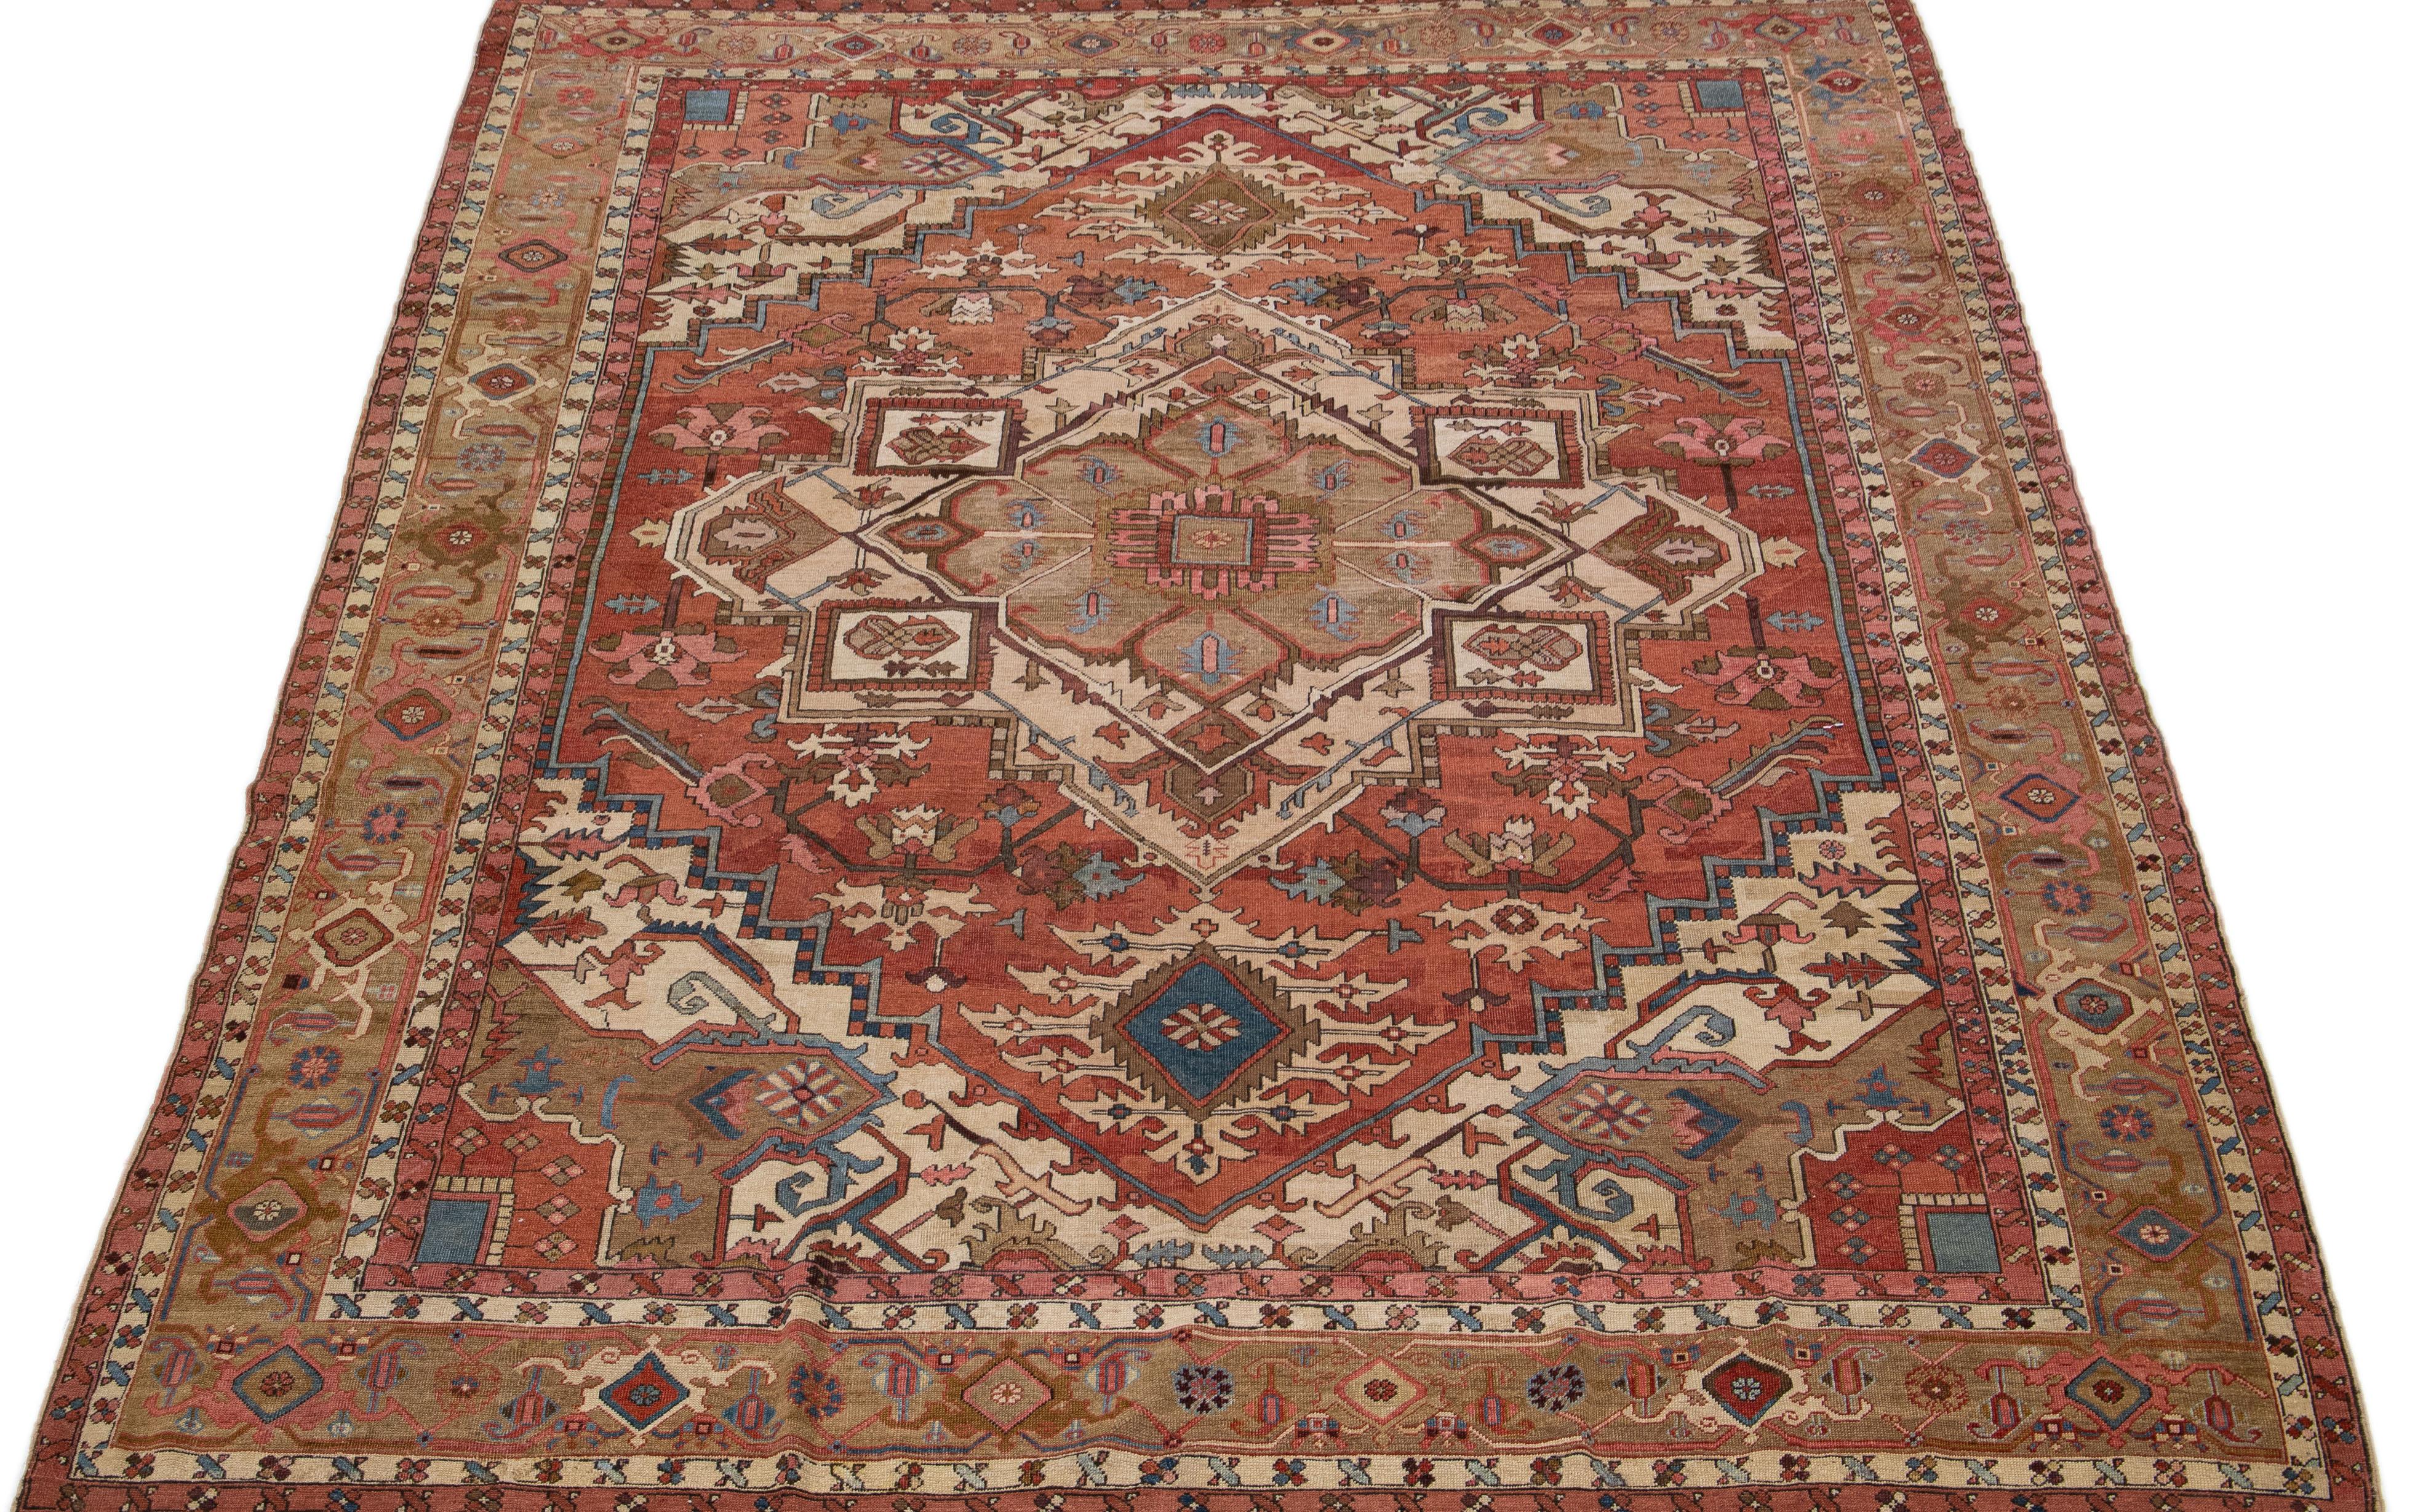 Beautiful antique serapi hand knotted wool rug with a rust color field. This Persian rug has a brown designed frame with multicolor accents in a gorgeous medallion floral motif. This stunning handcrafted work of art will add warmth and